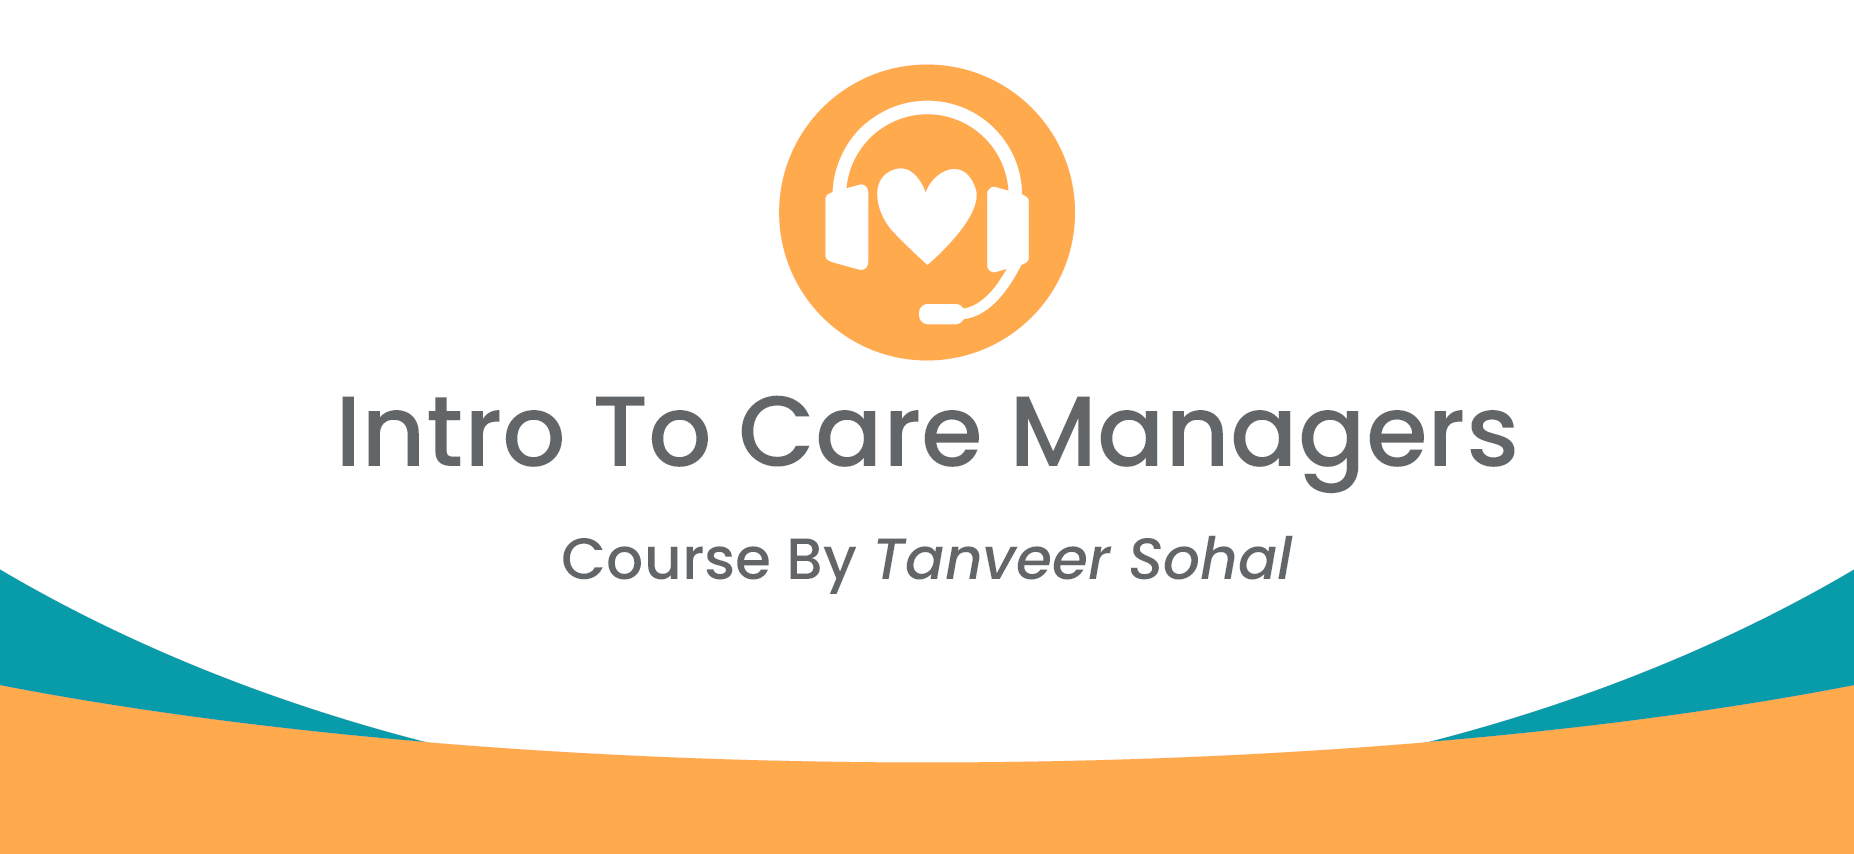 Intro to Care Managers